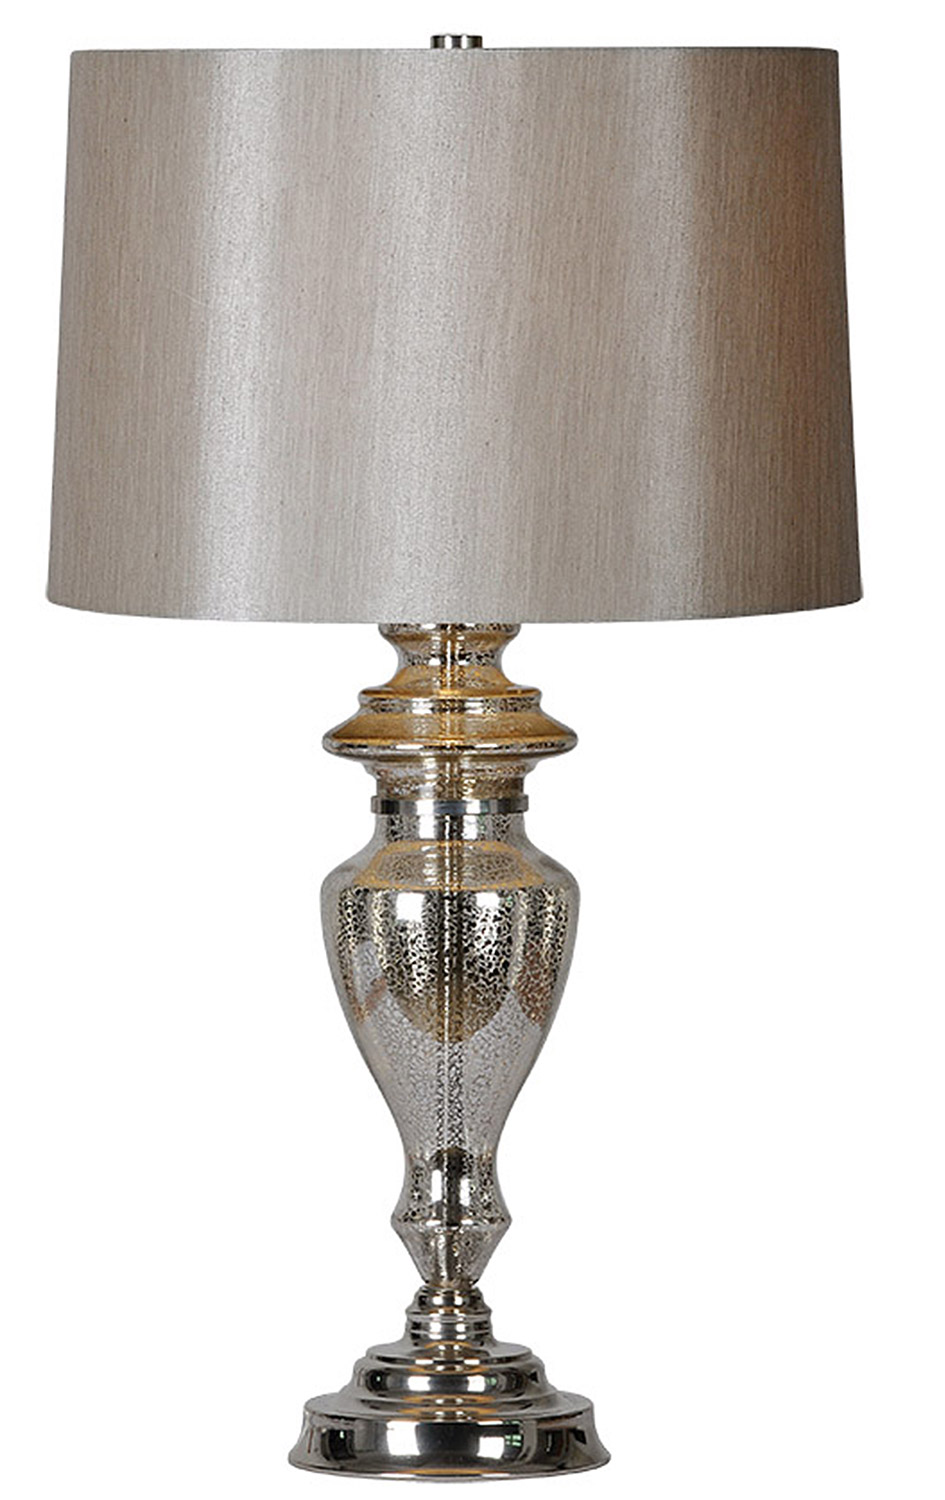 Ren-Wil Winola Table Lamp - Silver Plated